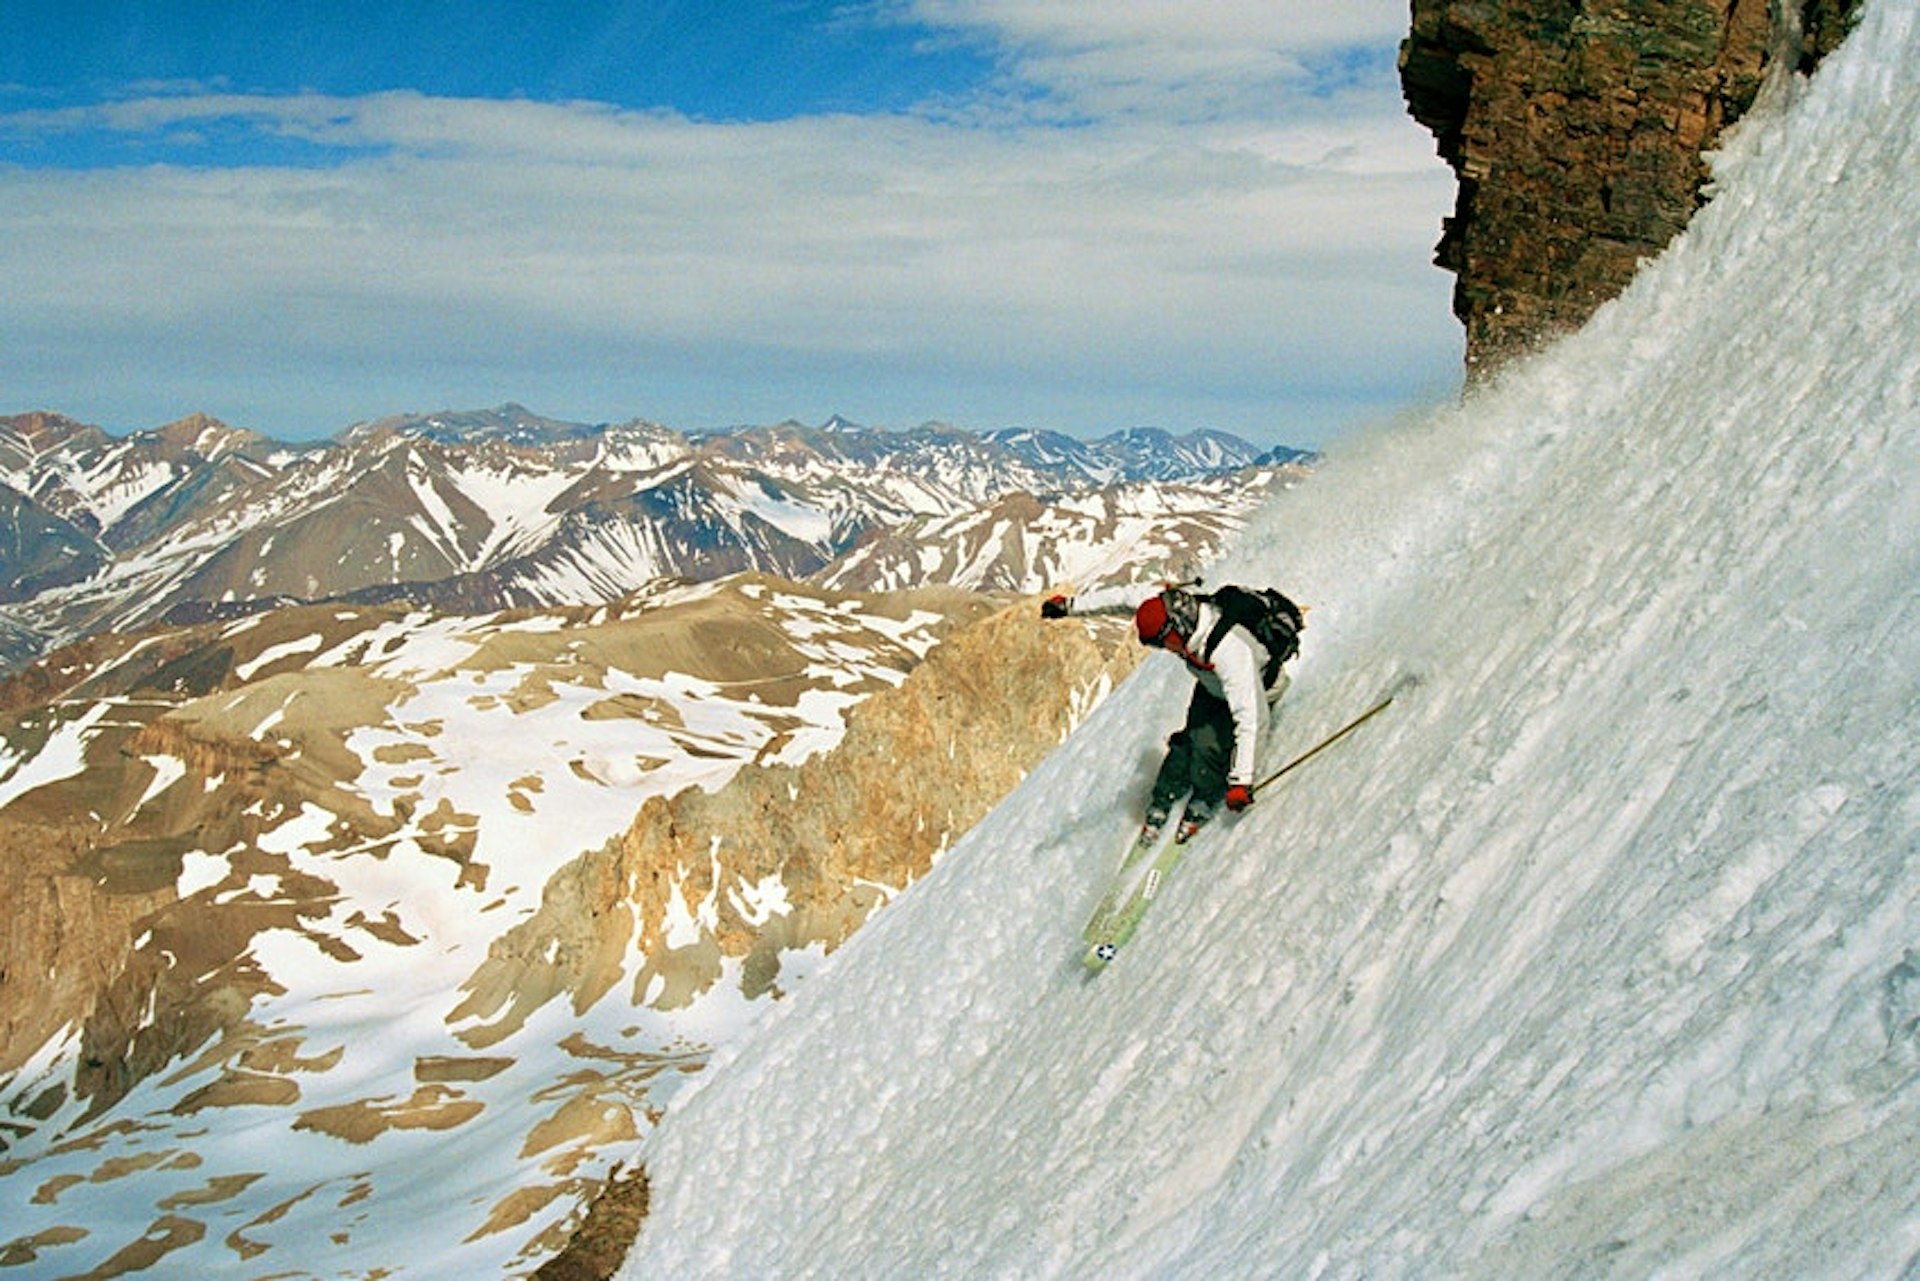 A skier descends down a very steep mountain in Las Lenas, Argentina 